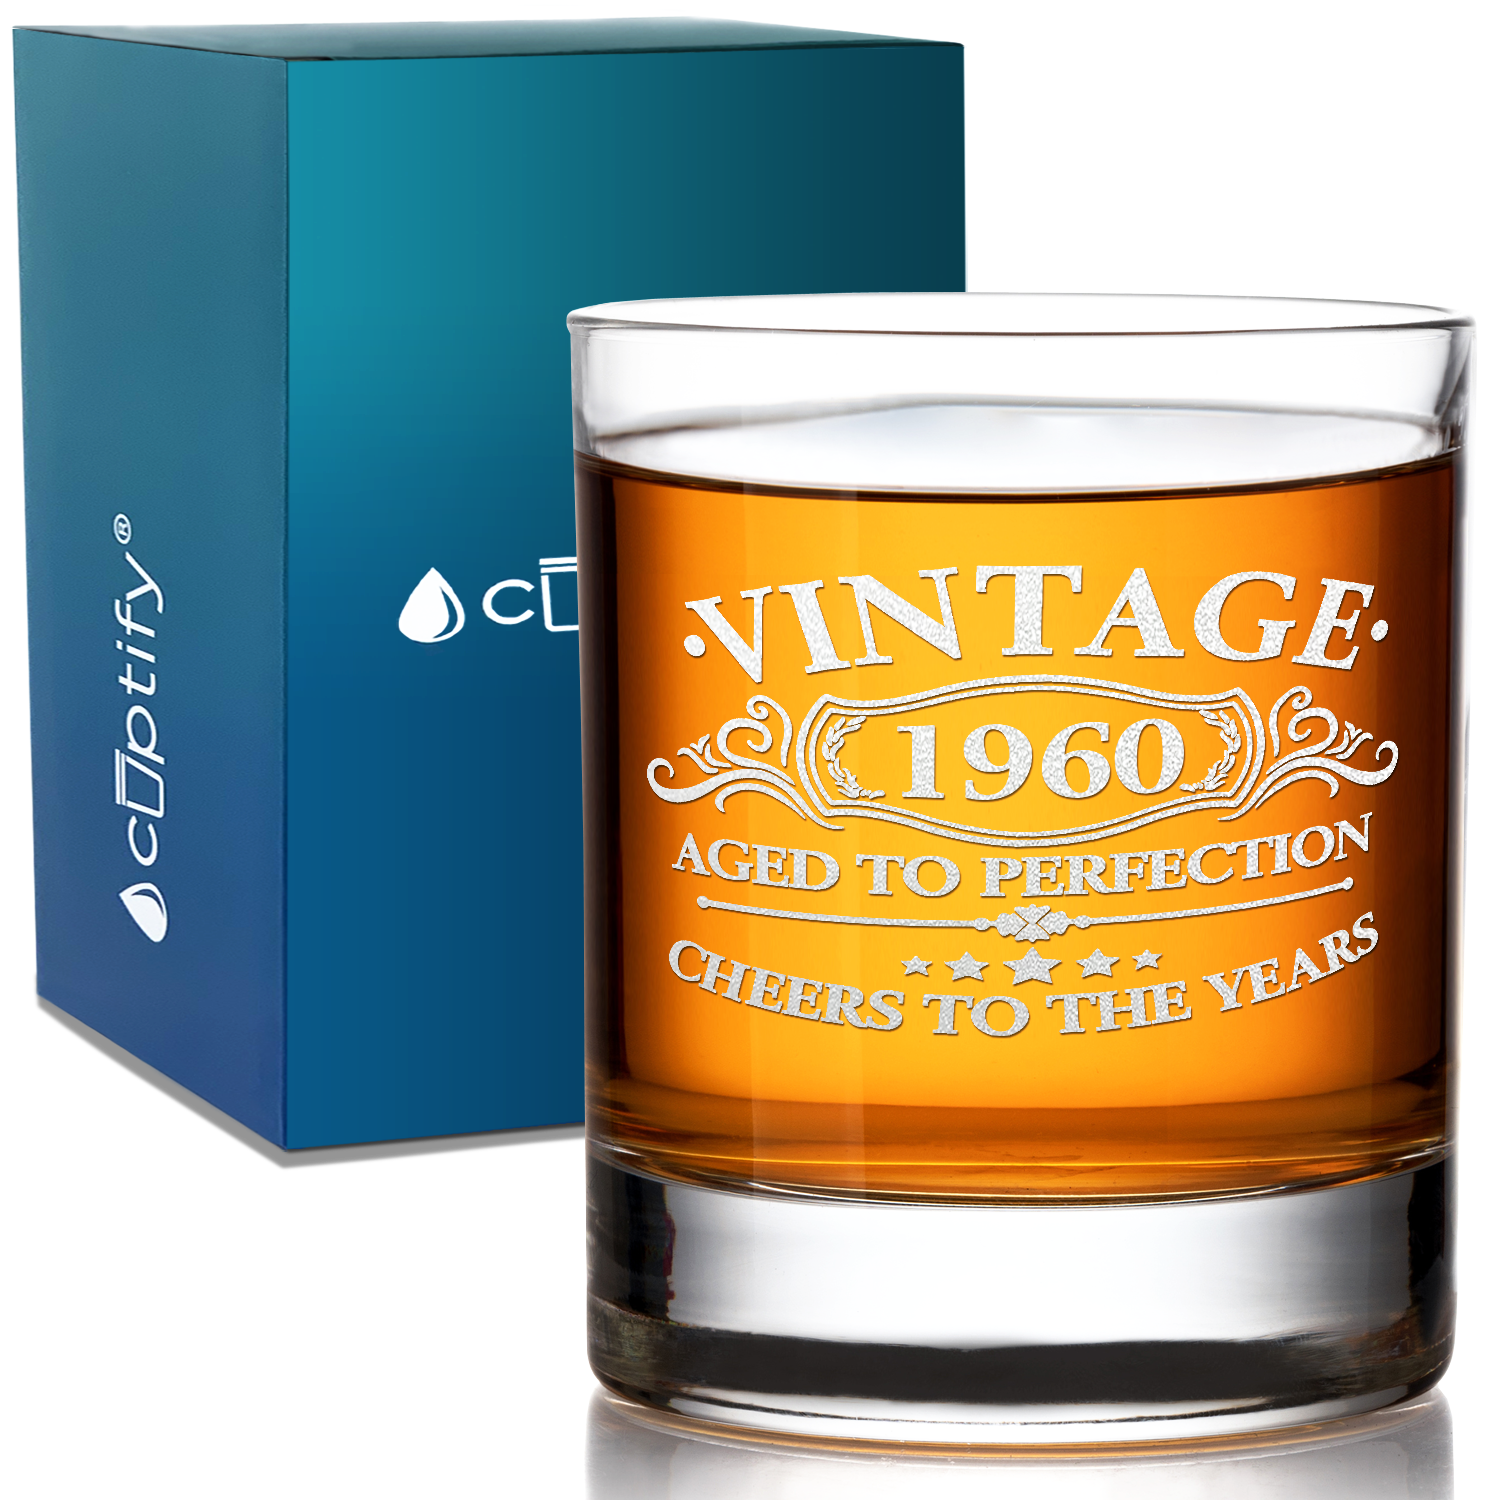 Vintage Aged To Perfection Cheers To 61 Years 1960 Laser Engraved on 10.25oz Old Fashion Glass